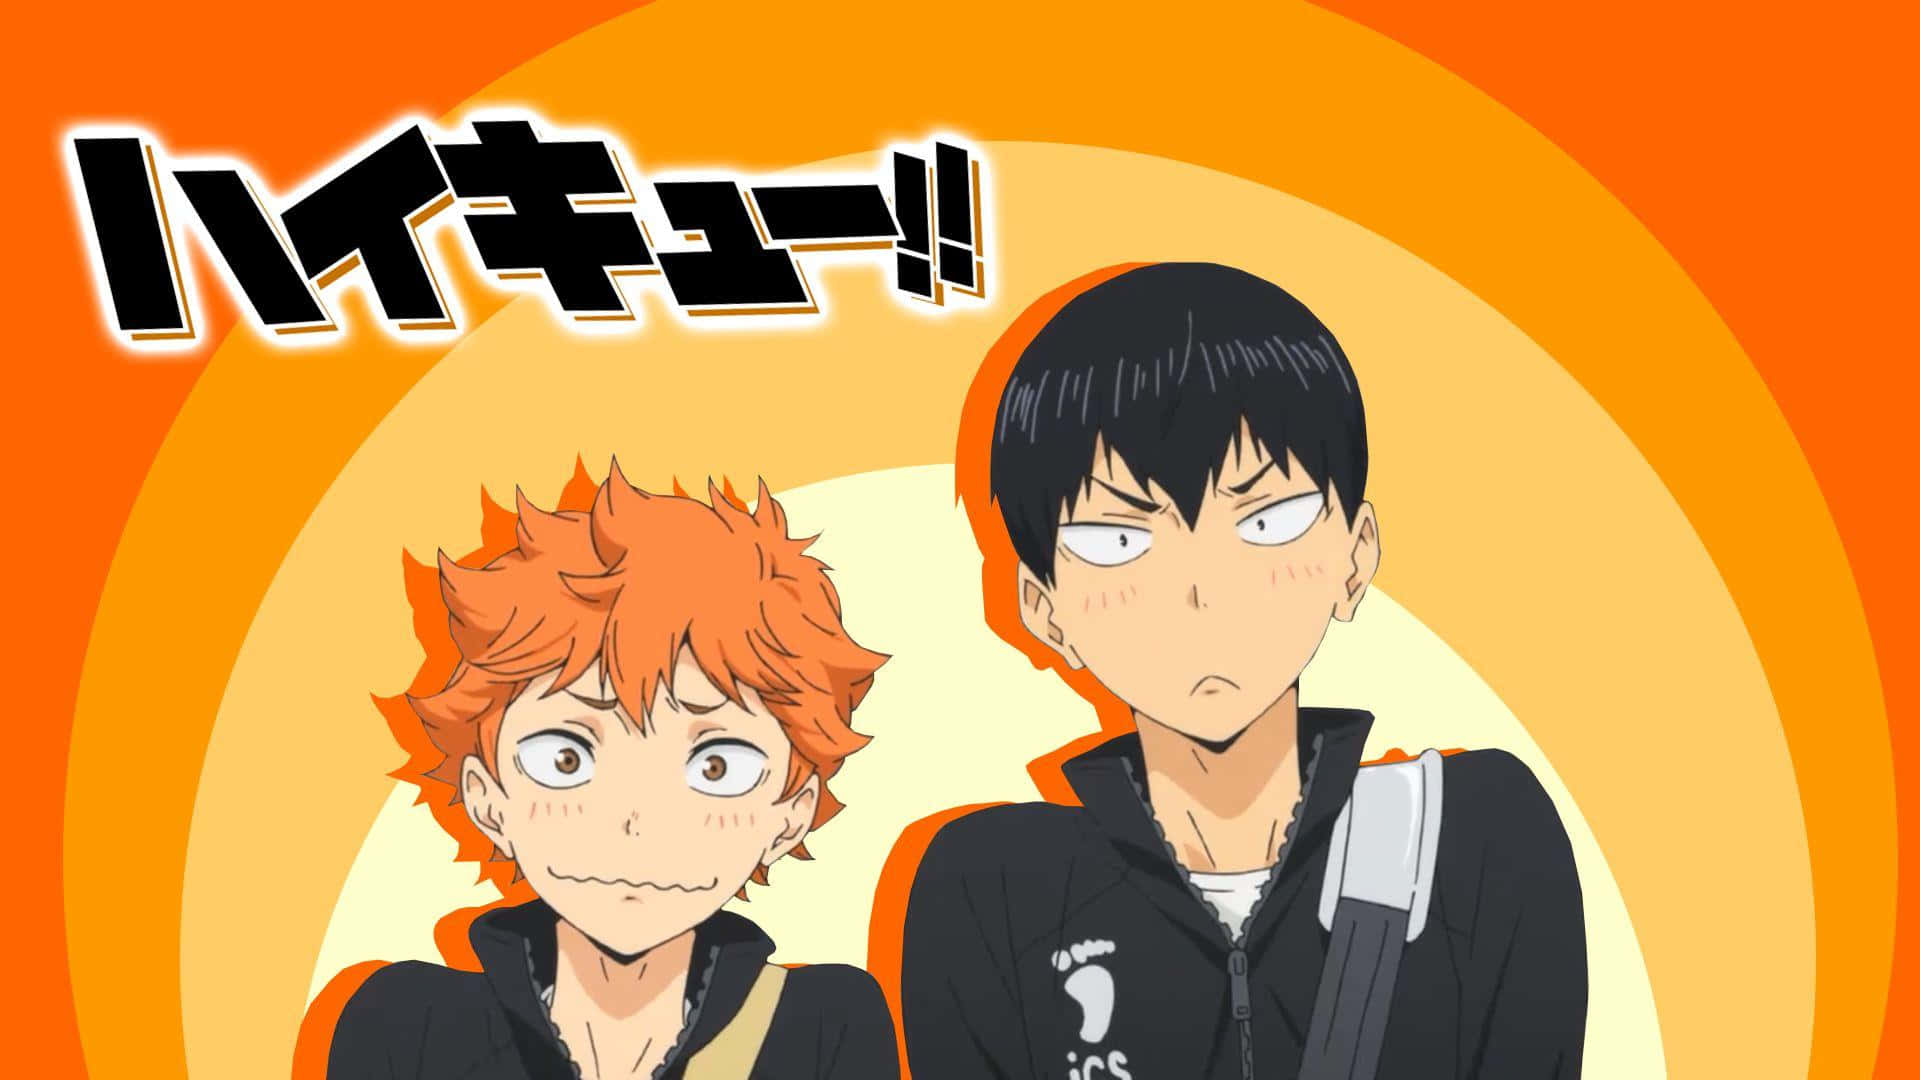 Unite The Tobio And The Karasuno Teams With A Haikyuu Themed Laptop. Background